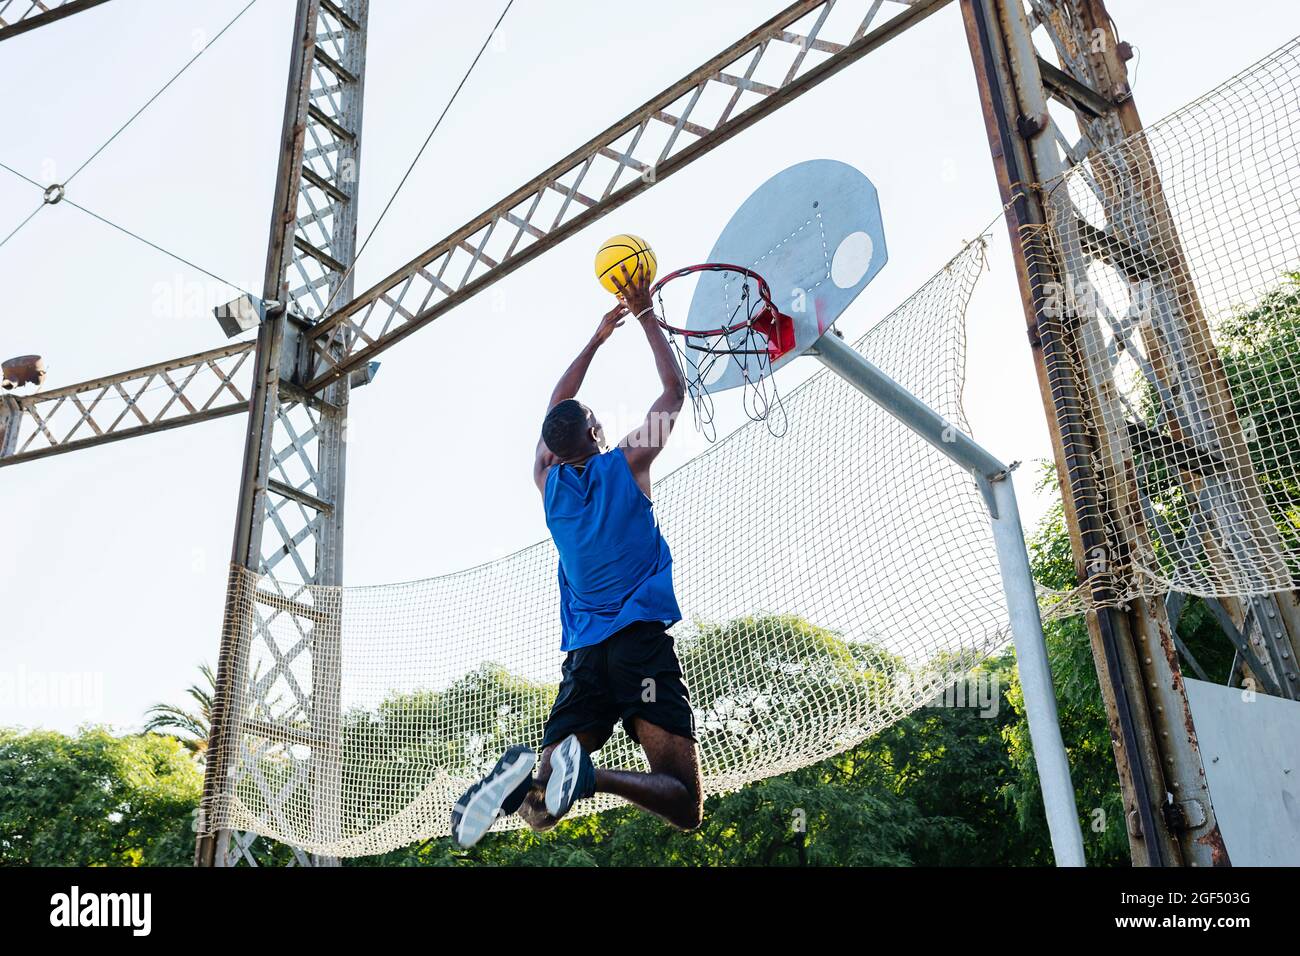 Young man dunking basketball while playing at sports court Stock Photo